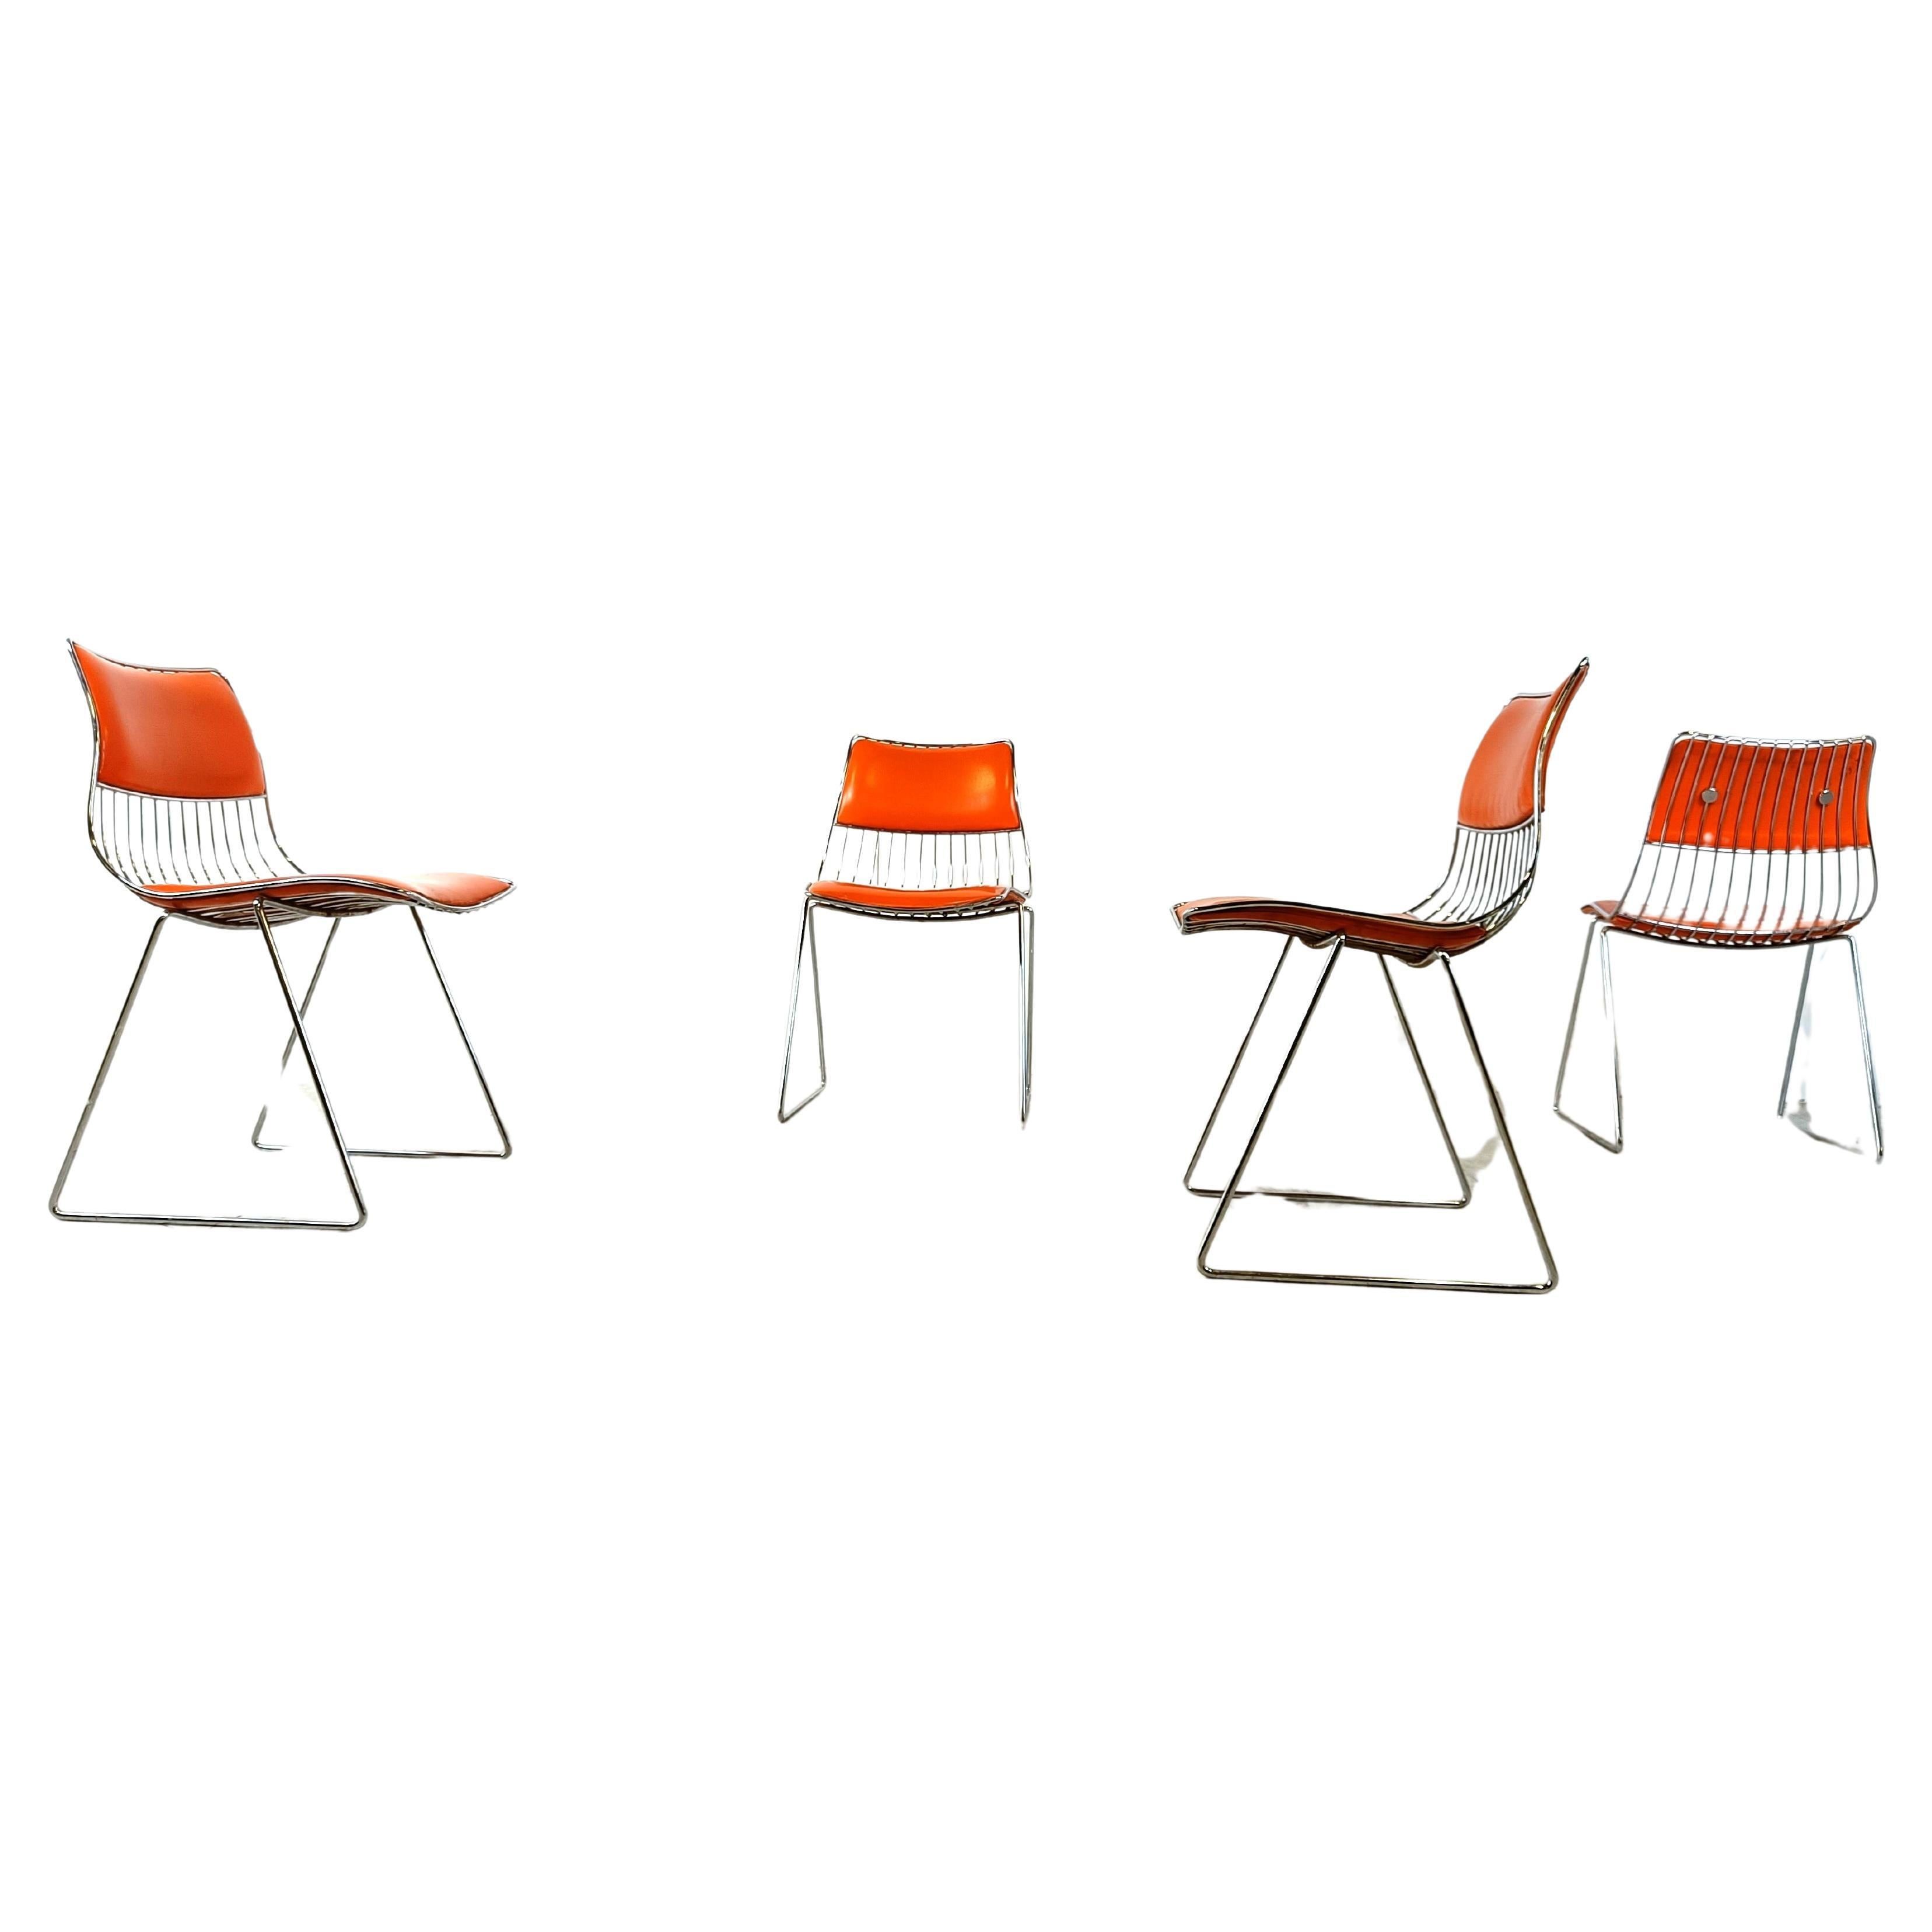 Set of 4 dining chairs by Rudi Verelst for Novalux, 1970s For Sale